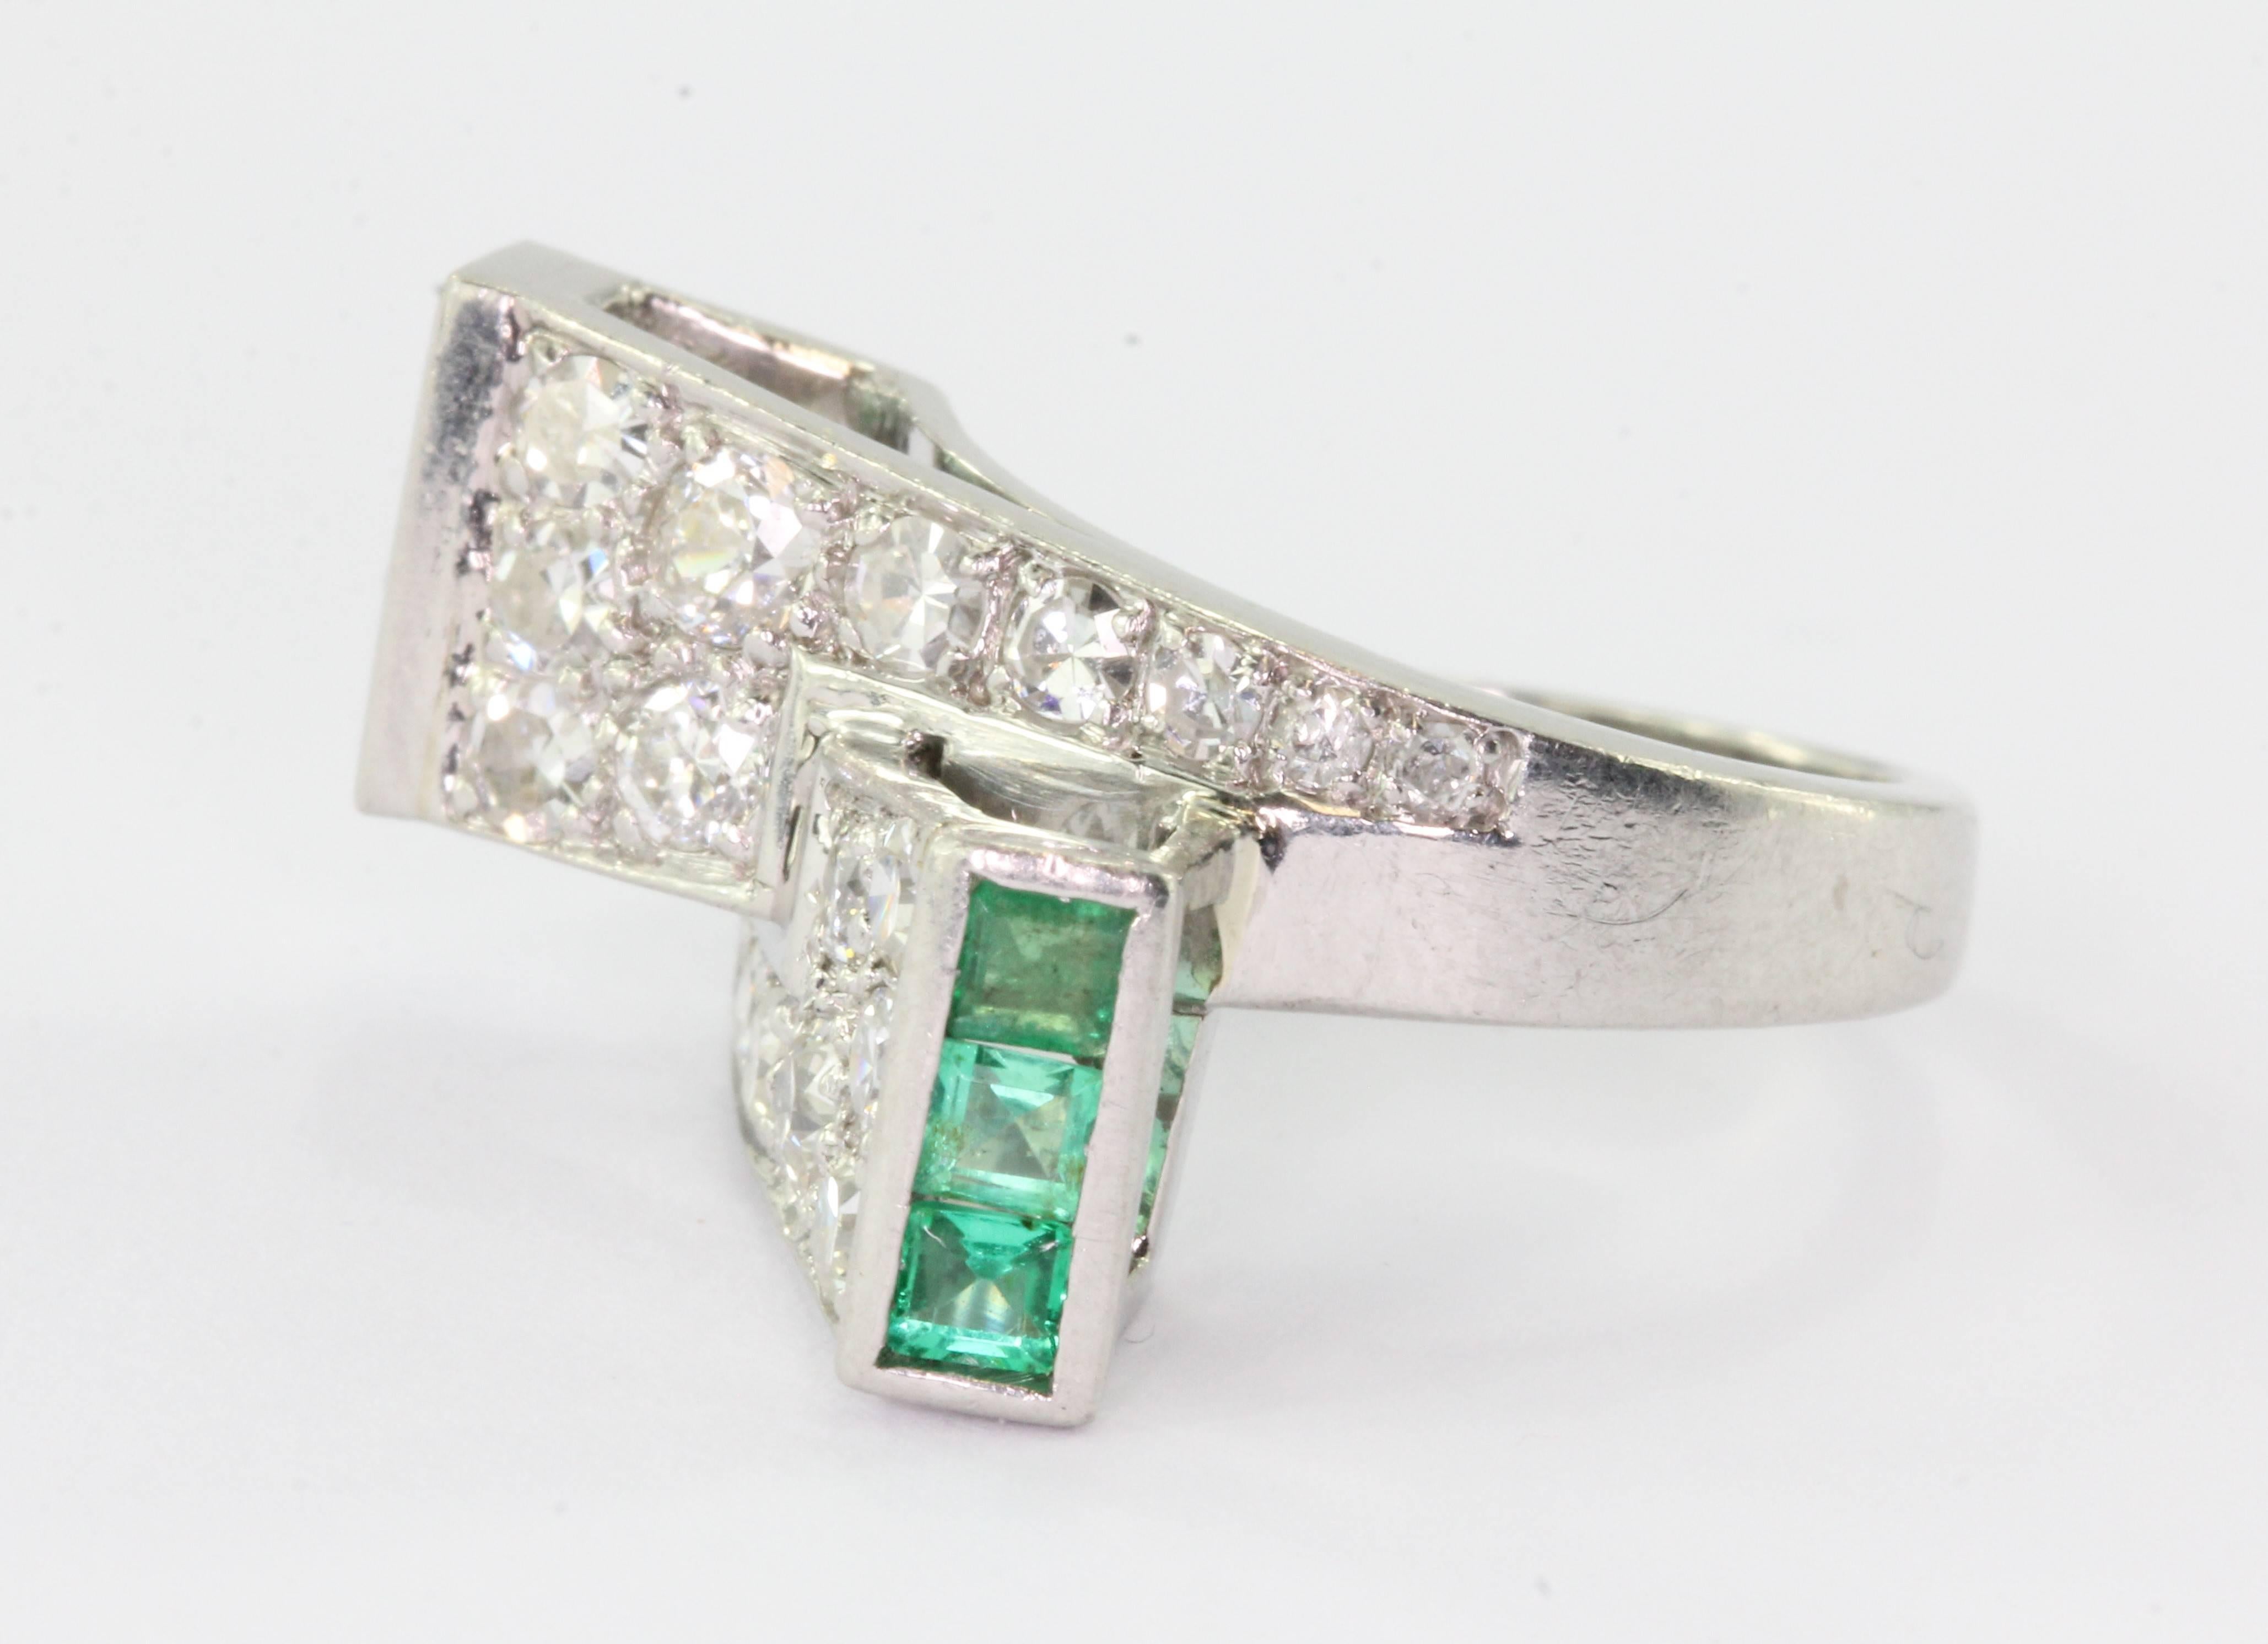 P. N. Lackritz Platinum Diamond Emerald Art Deco Ring Circa 1930's. The ring is in excellent condition and ready to wear. The ring is signed "LACKRITZ". The ring is made of platinum and set with 6 square cut natural .07 carat emeralds